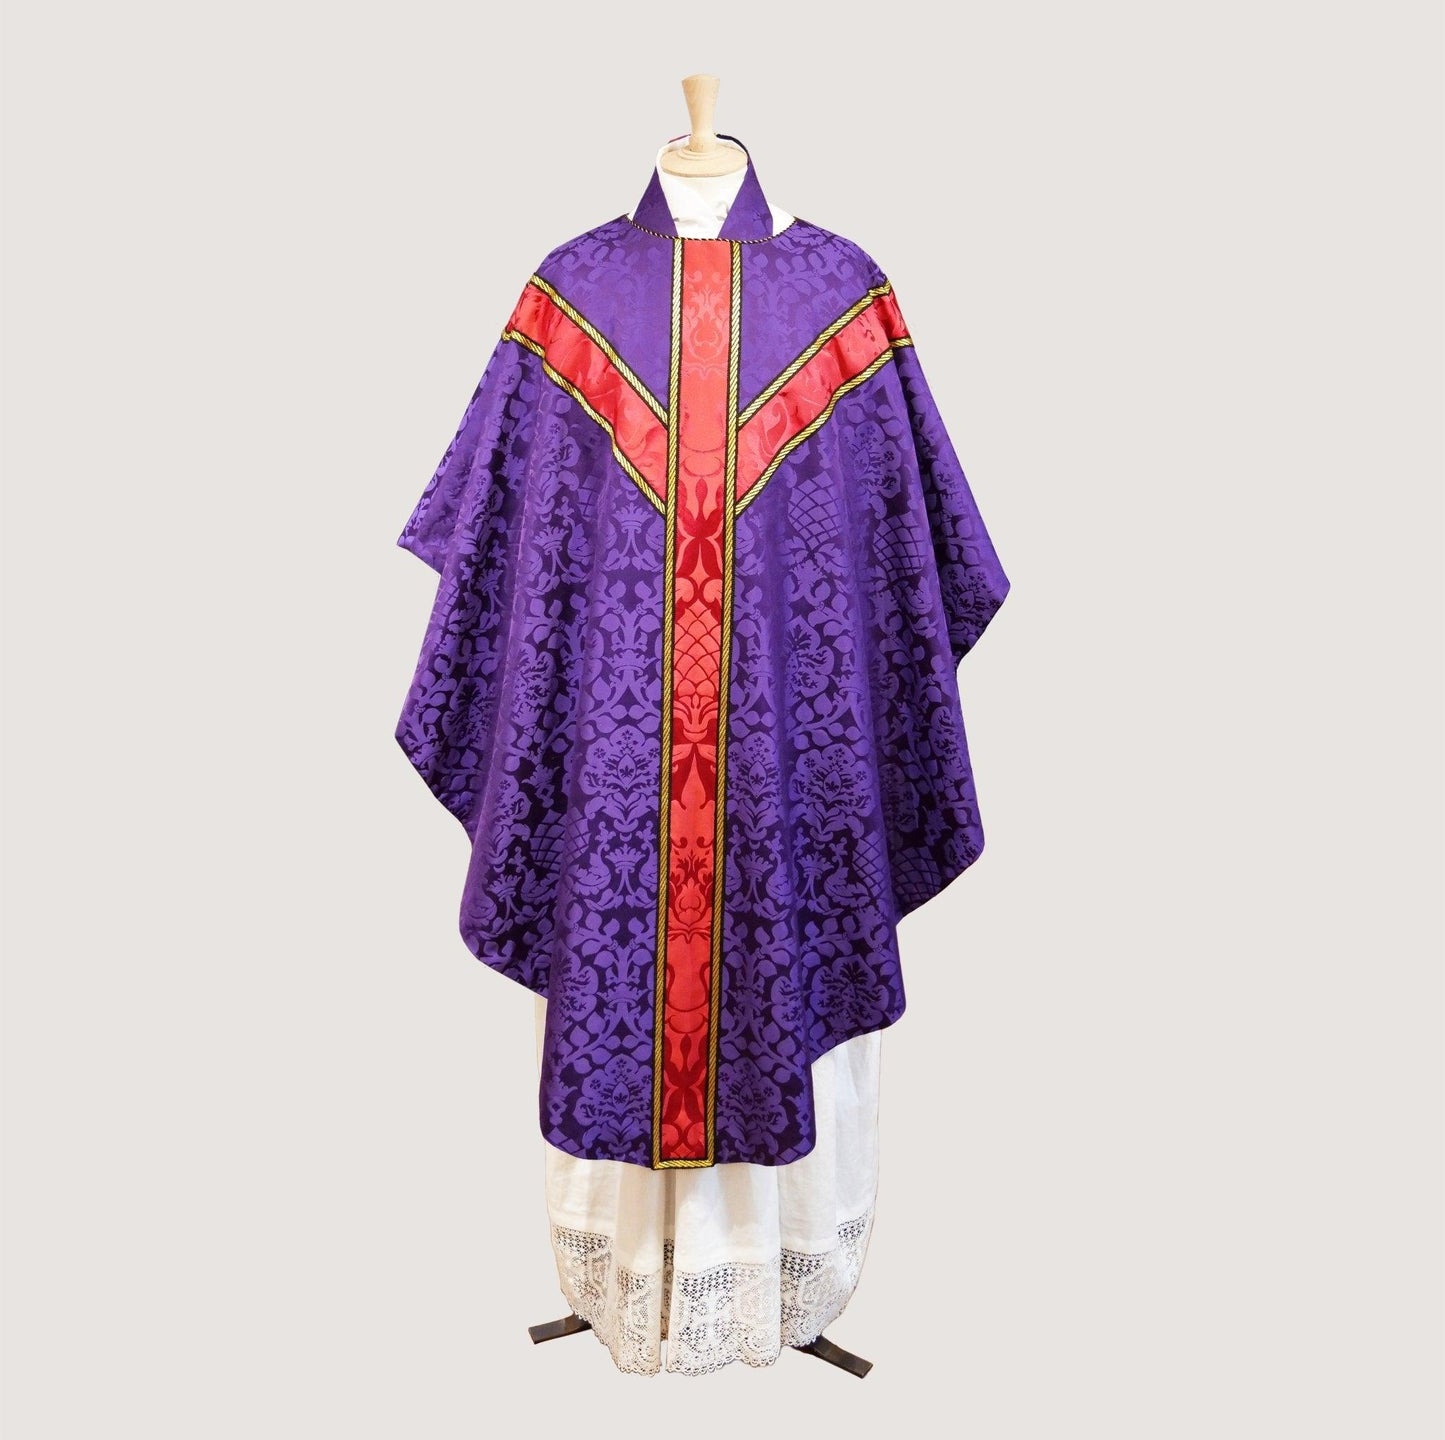 Gothic Chasuble in Purple 'Davenport' with Comper Rose 'Bellini' Silk Orphreys - Watts & Co.